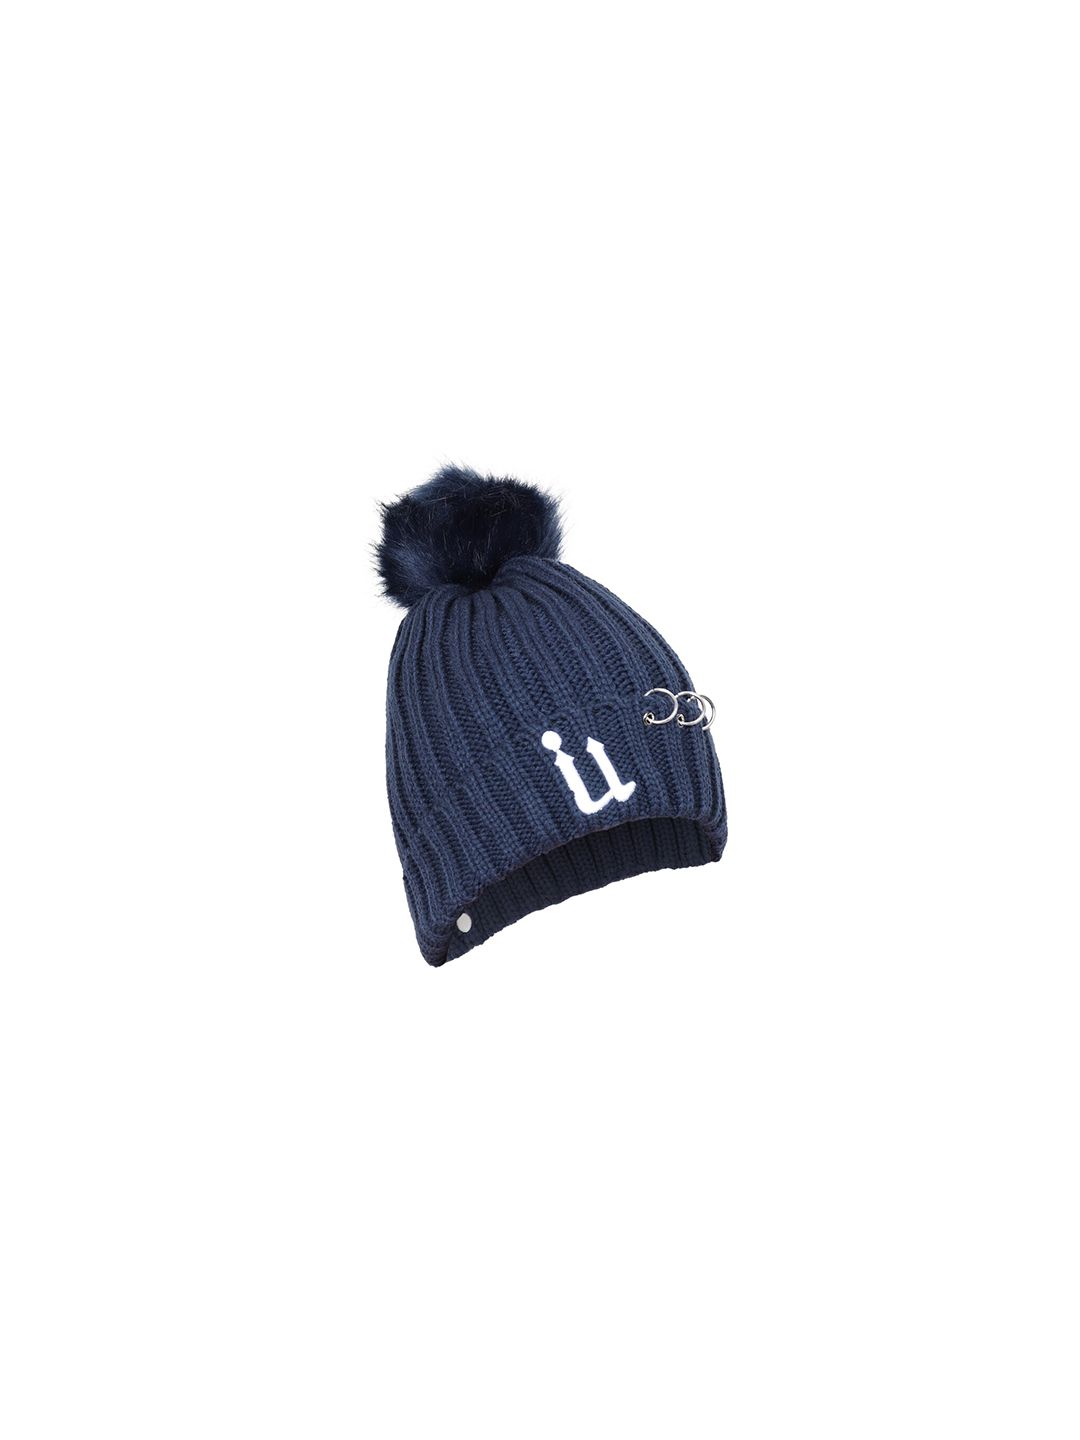 iSWEVEN Unisex Blue & White Beanie Price in India